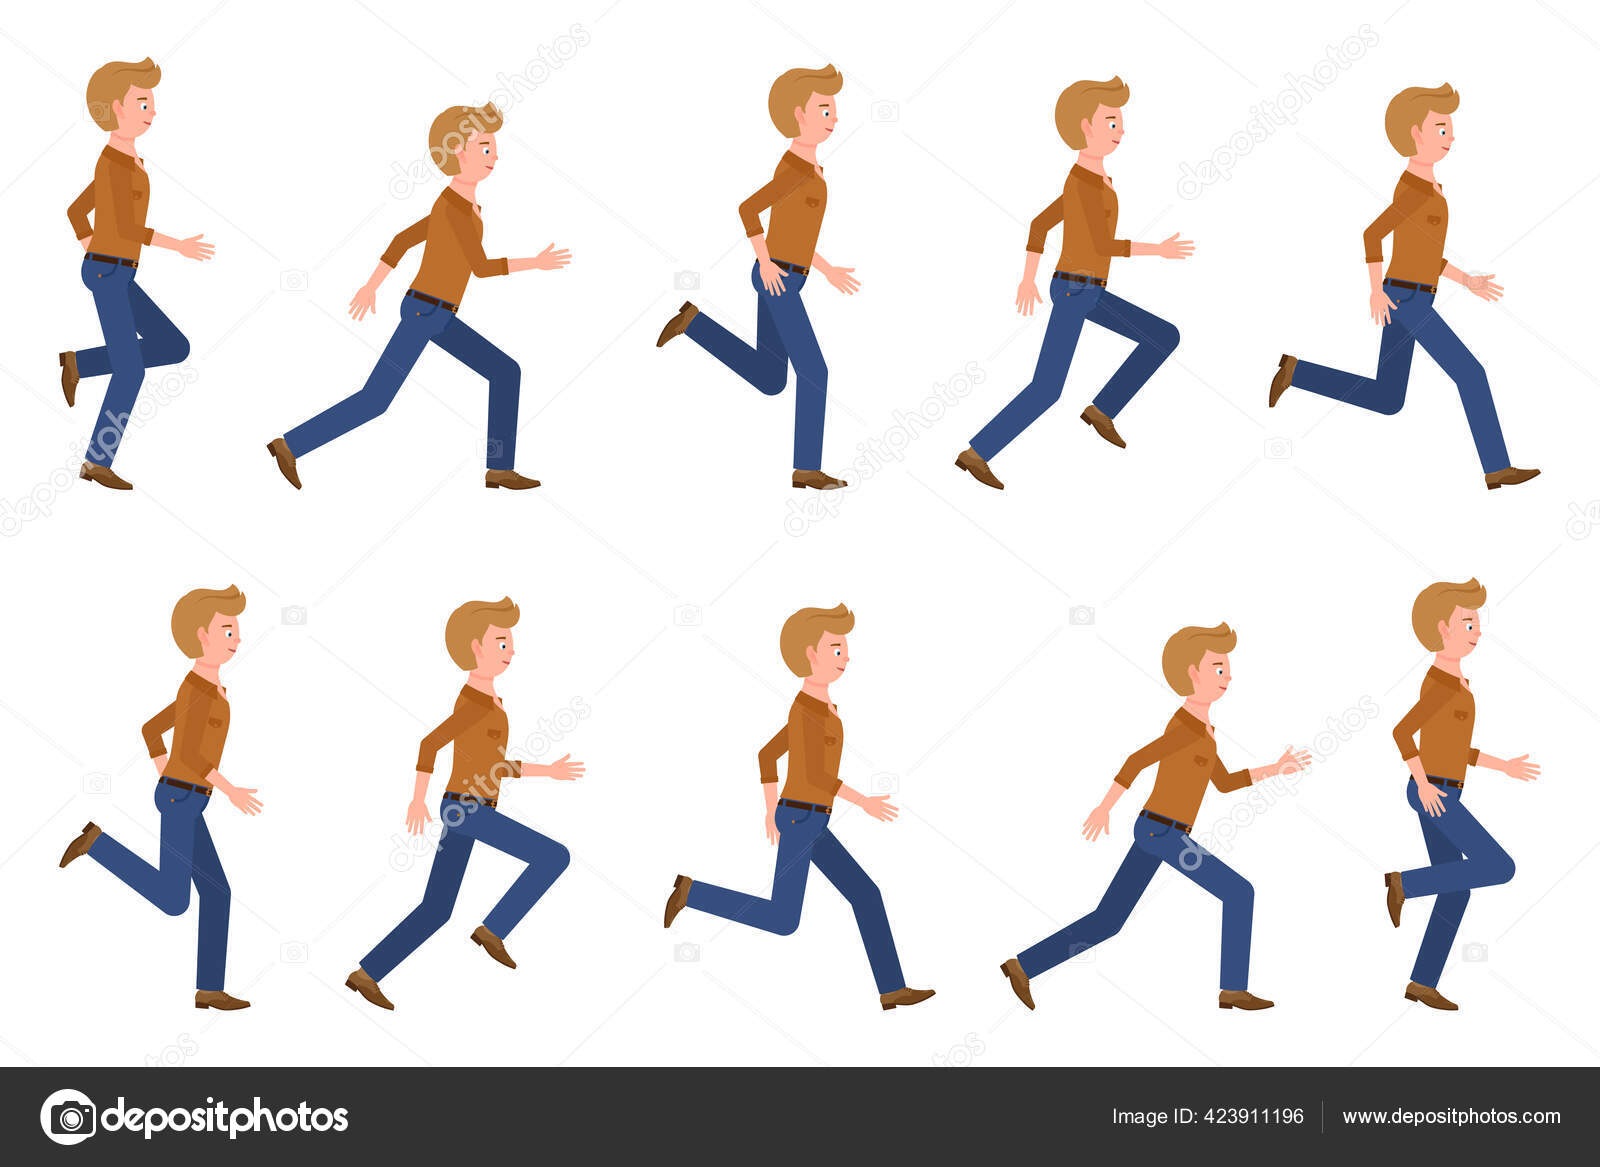 Walking Poses Vector Art, Icons, and Graphics for Free Download